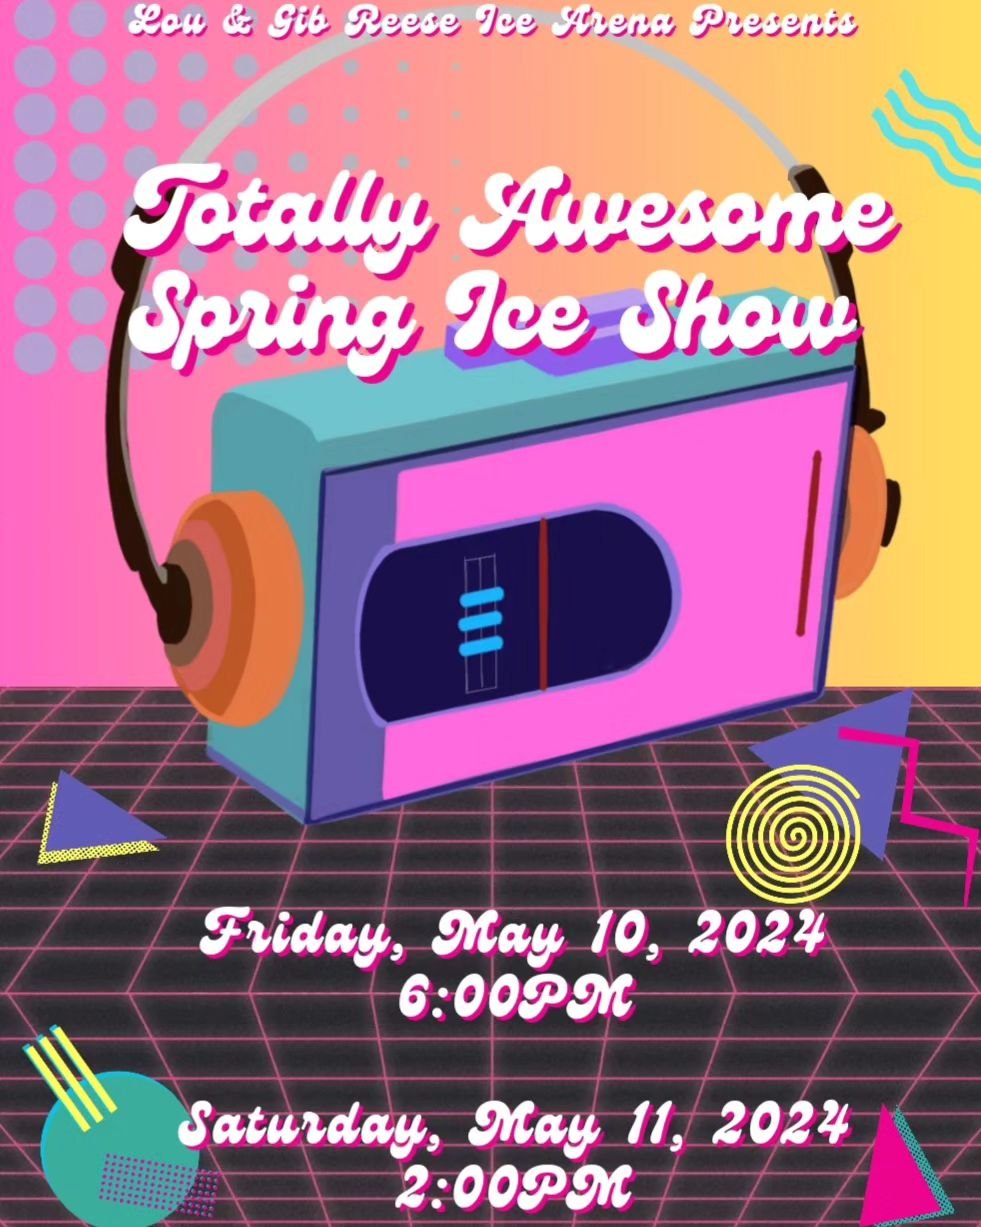 Pull out your jellie shoes and leg warmers because we are going back to the 80s! Don't miss our spring figure skating show because it will be totally awesome! Tickets on sale now!